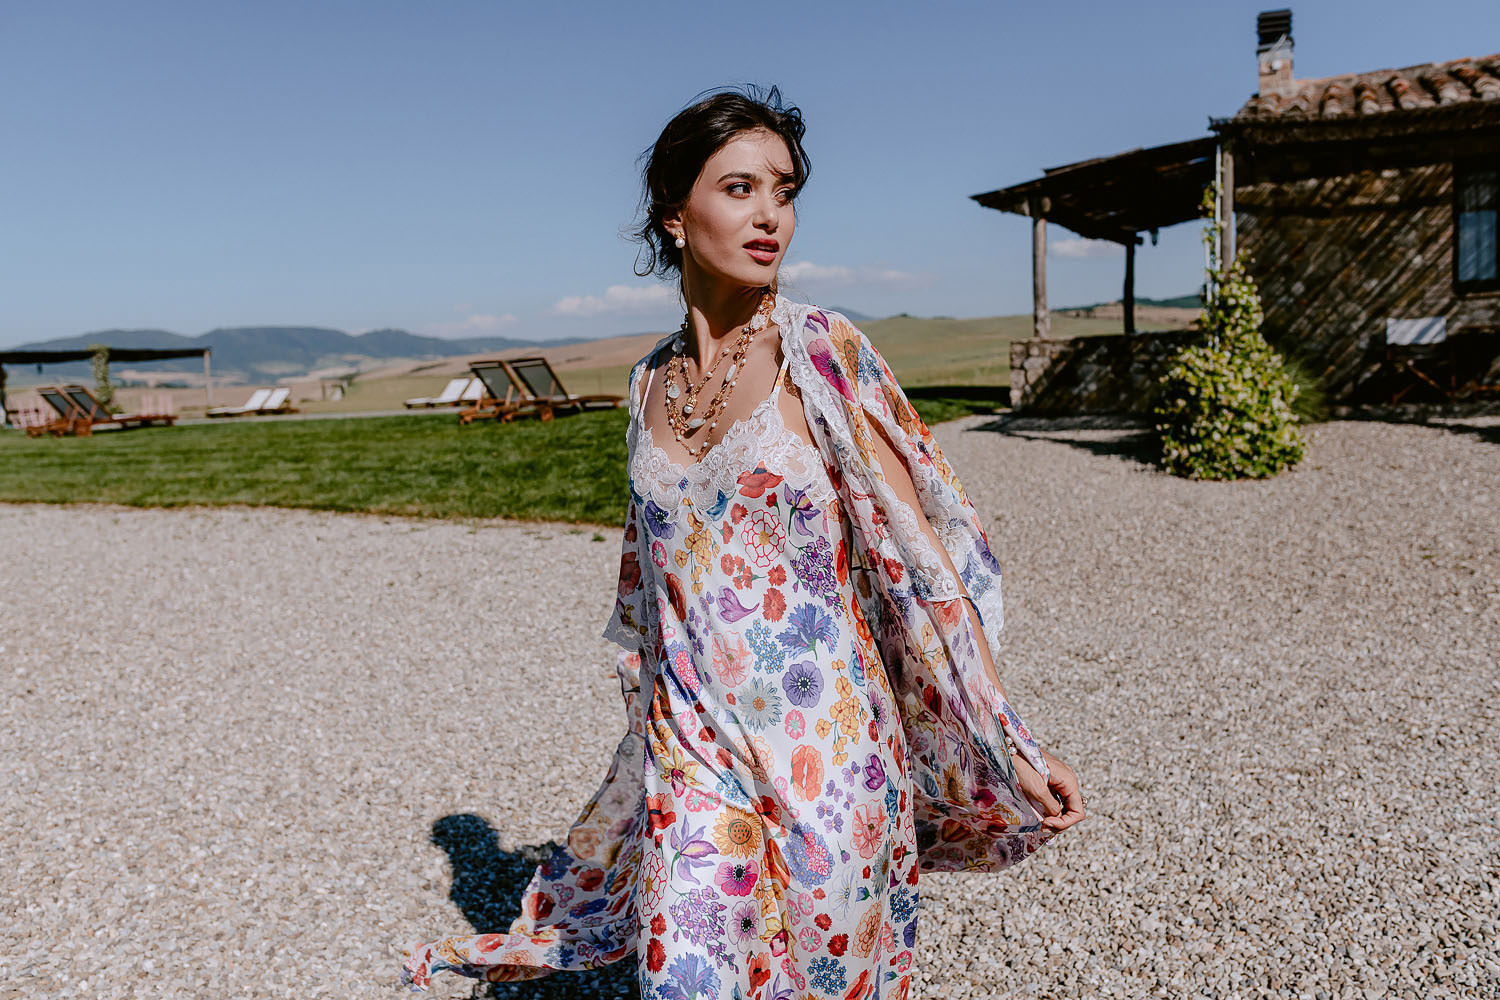 editorial Wedding Inspiration Tuscan Rolling Hills bride in petticoat and dressing gown outdoor fashion vibe